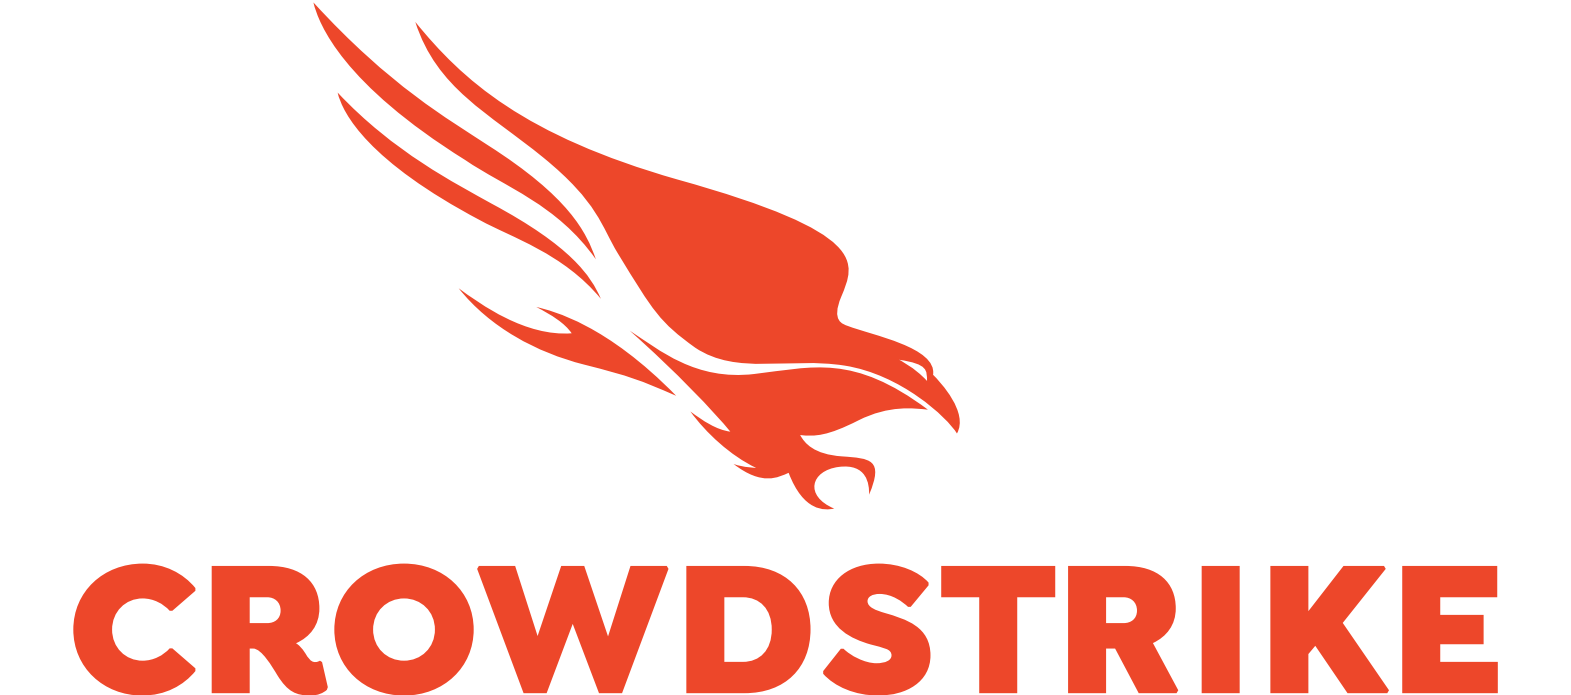 Crowdstrike Falcon Endpoint Protection Pro (NGAV)